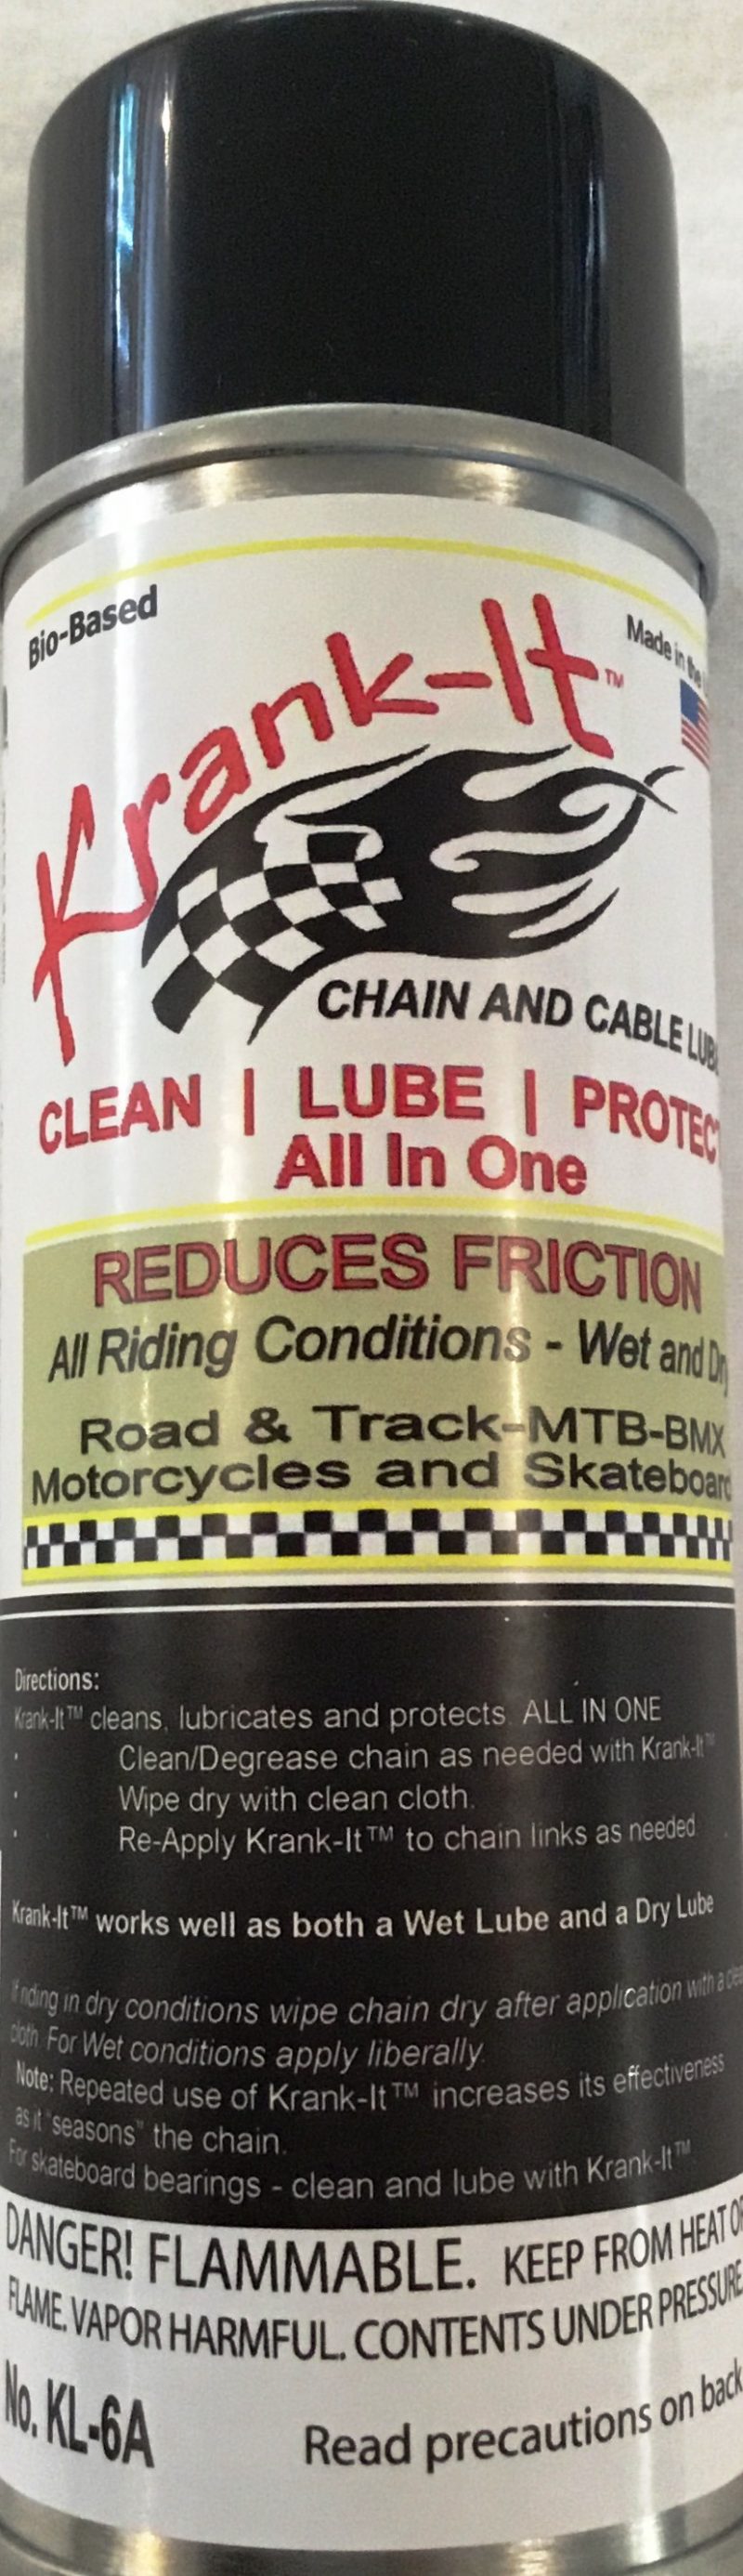 Bio-Based "Green Engineered" Chain and Cable Lube Krank-It™